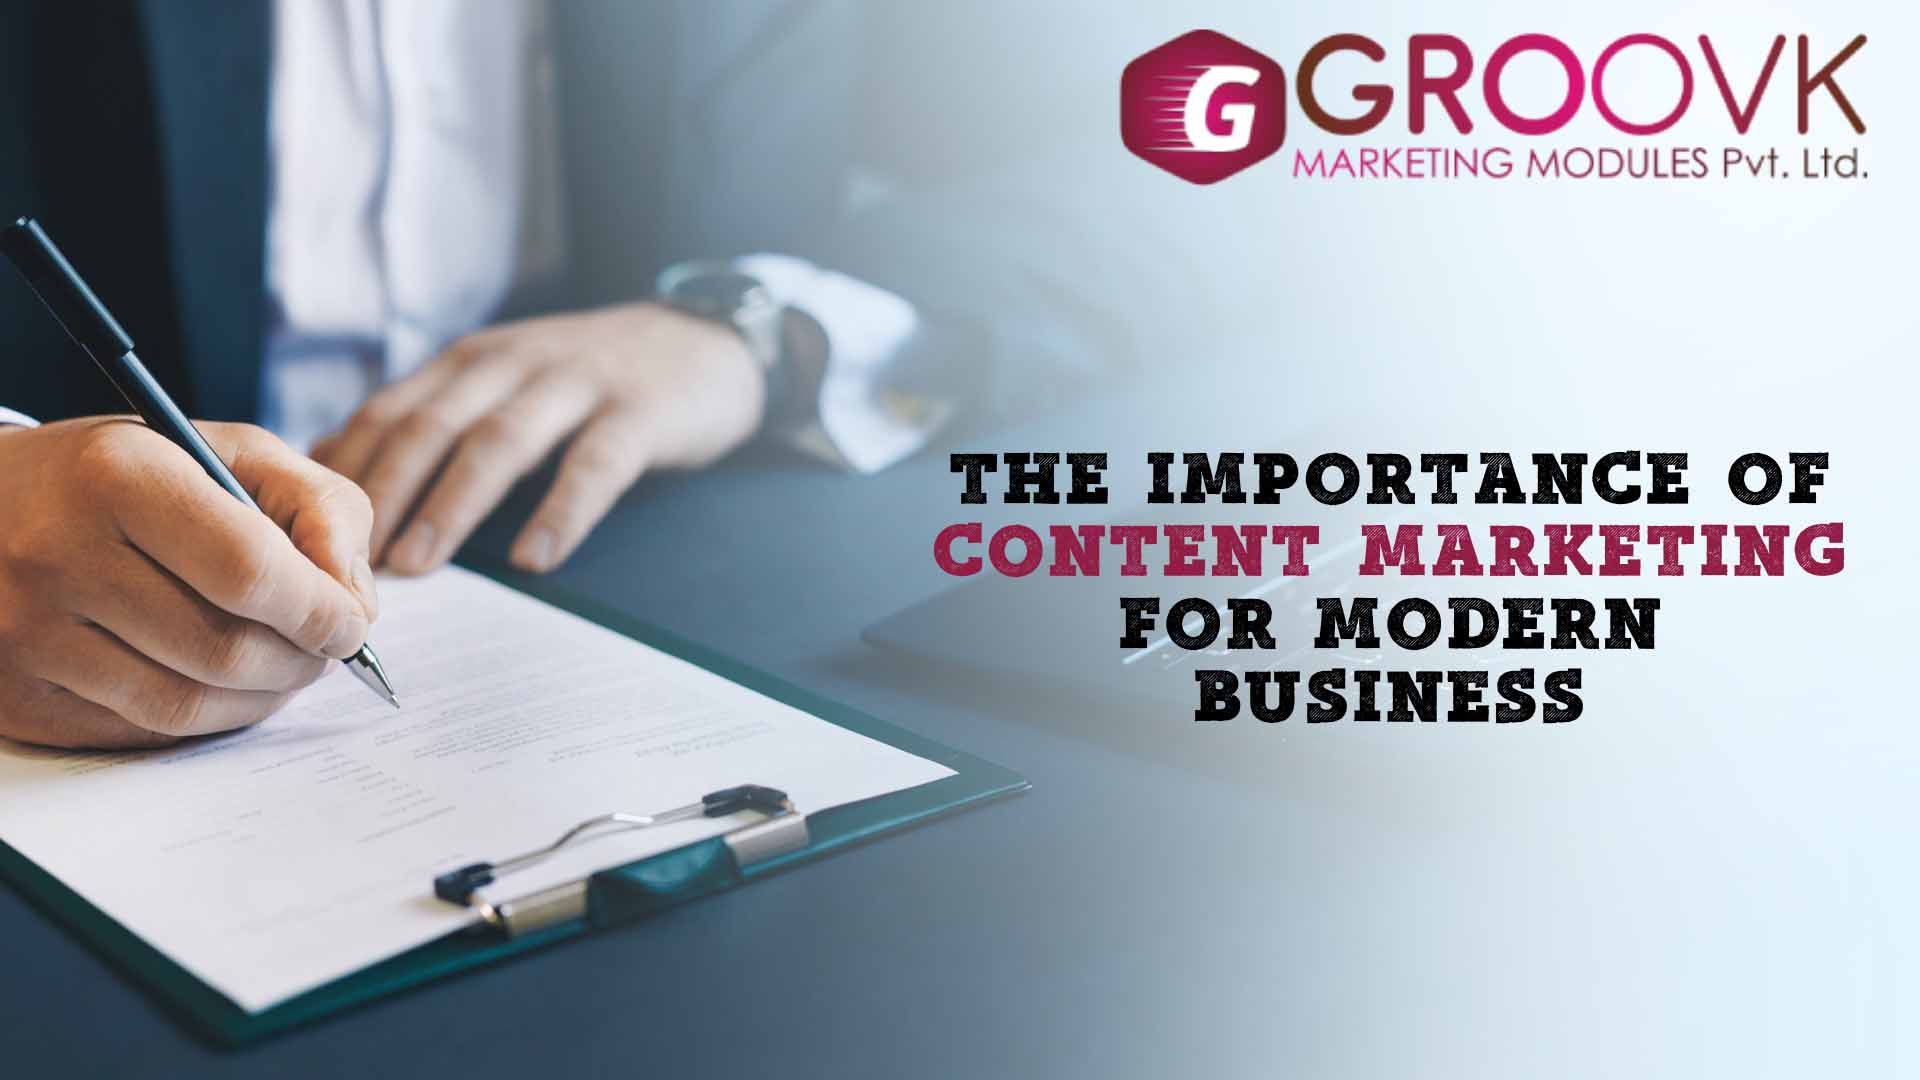 The Importance of Content Marketing for Modern Business
								